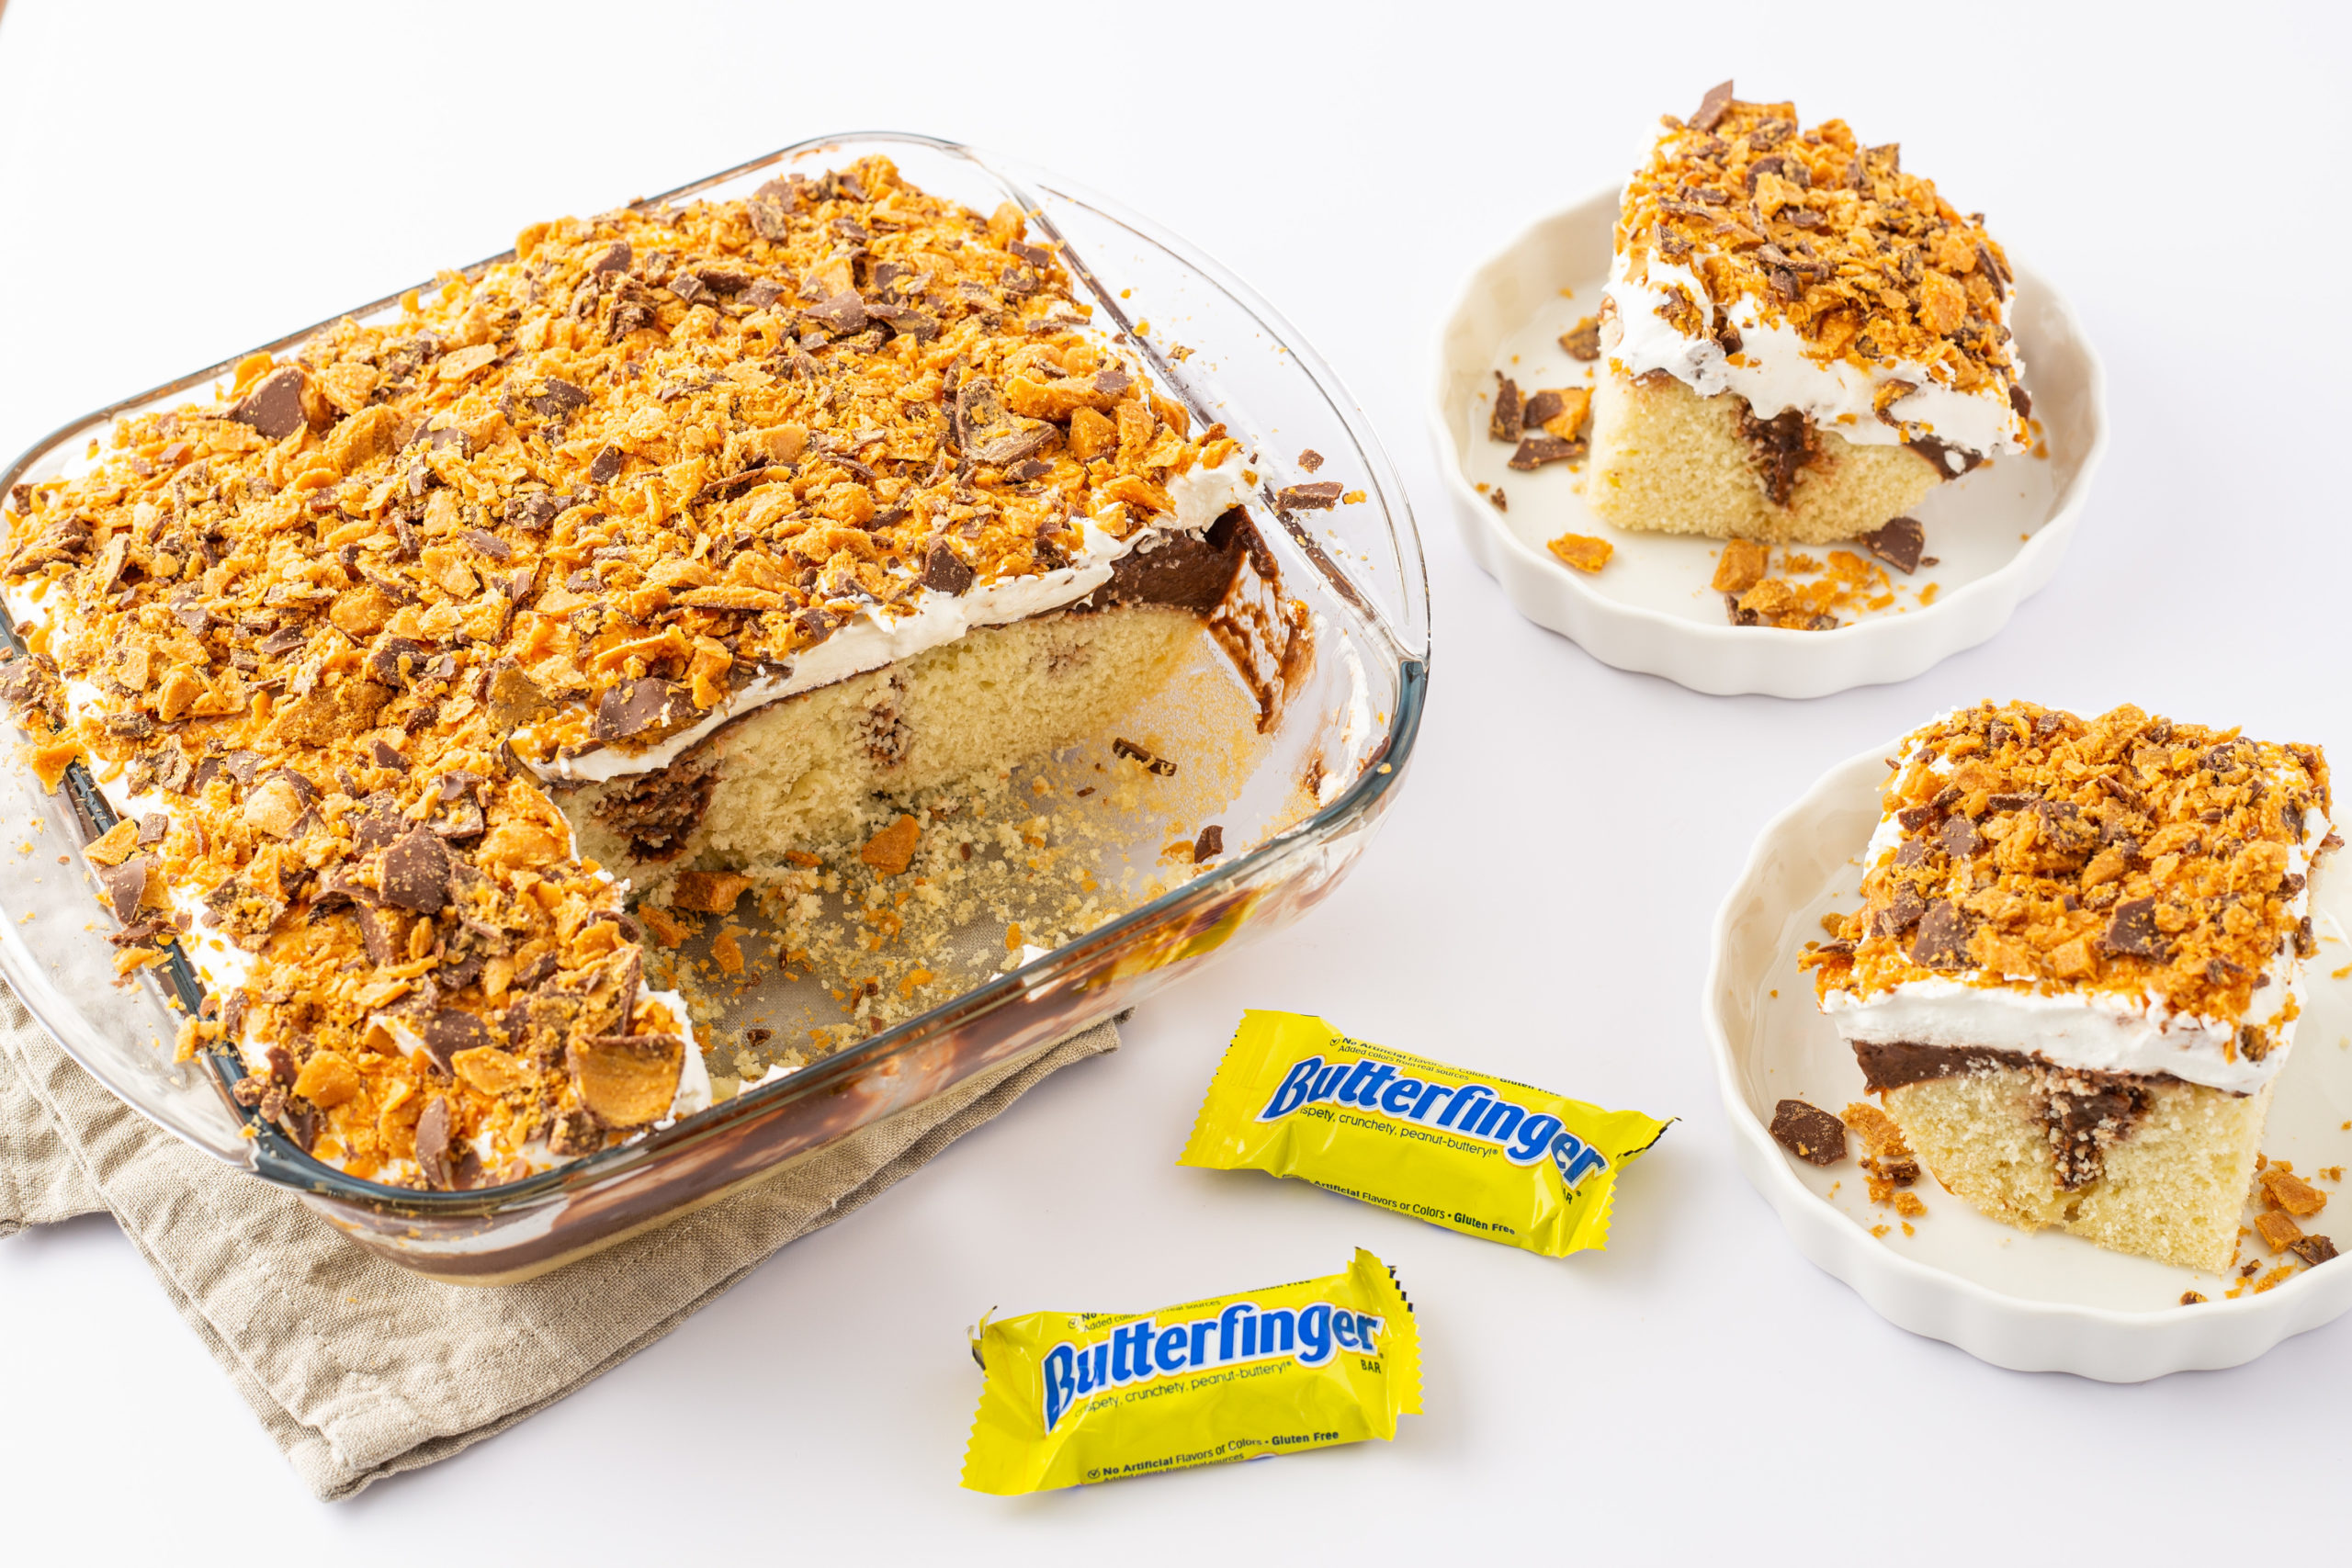 A slice of cake with some mini butterfingers.